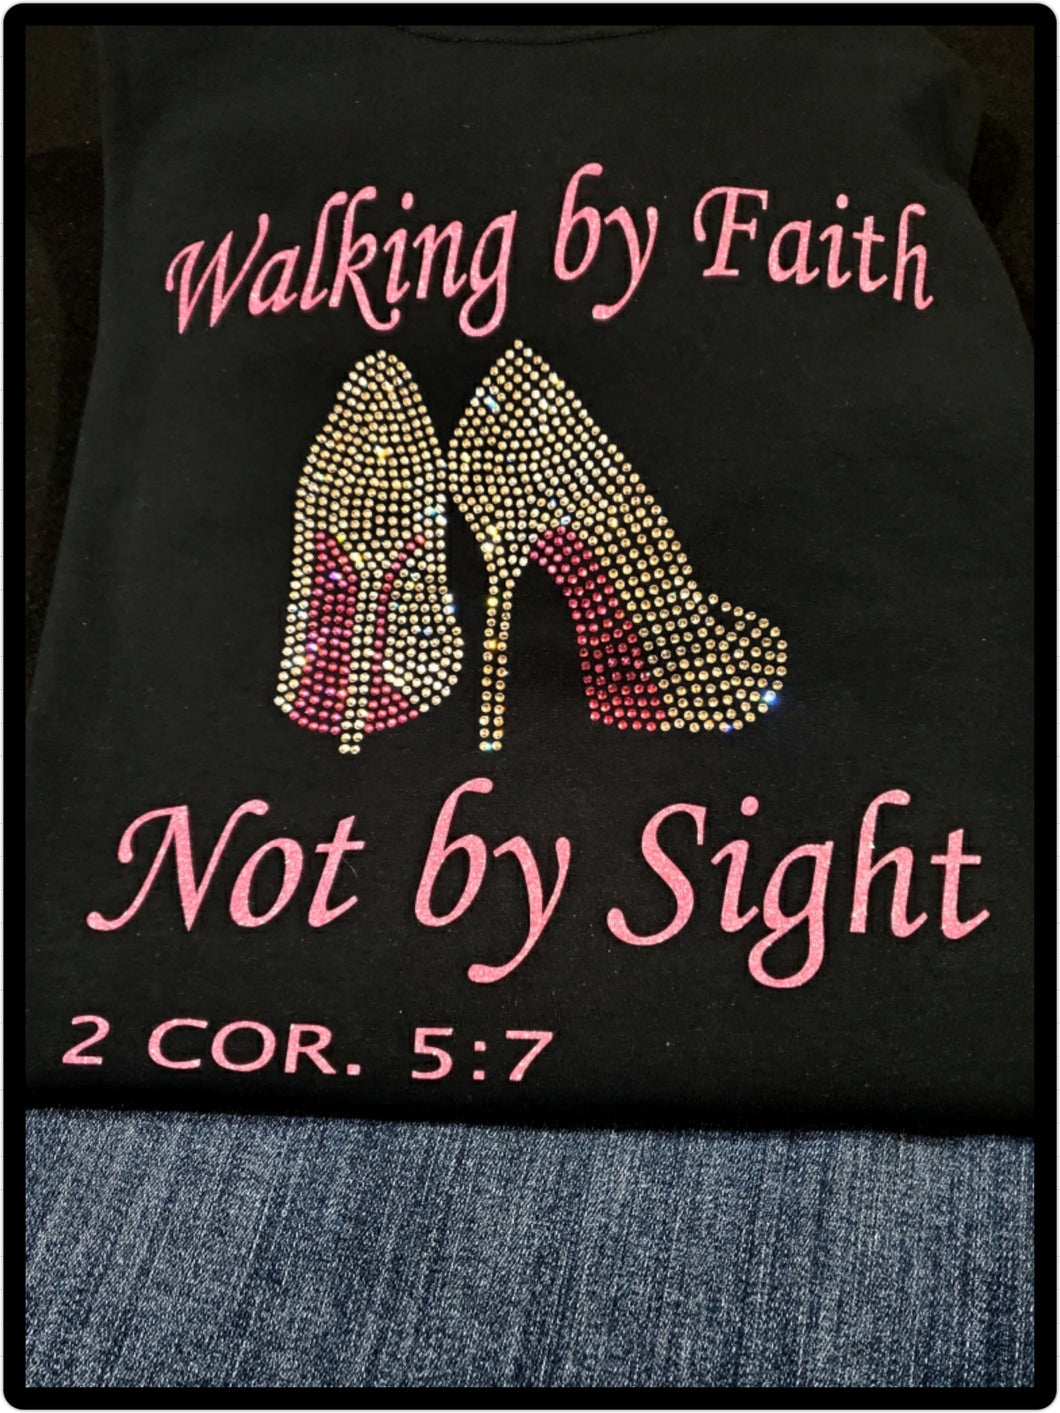 Walking by Faith Not by Sight - Rhinestone and Vinyl Design